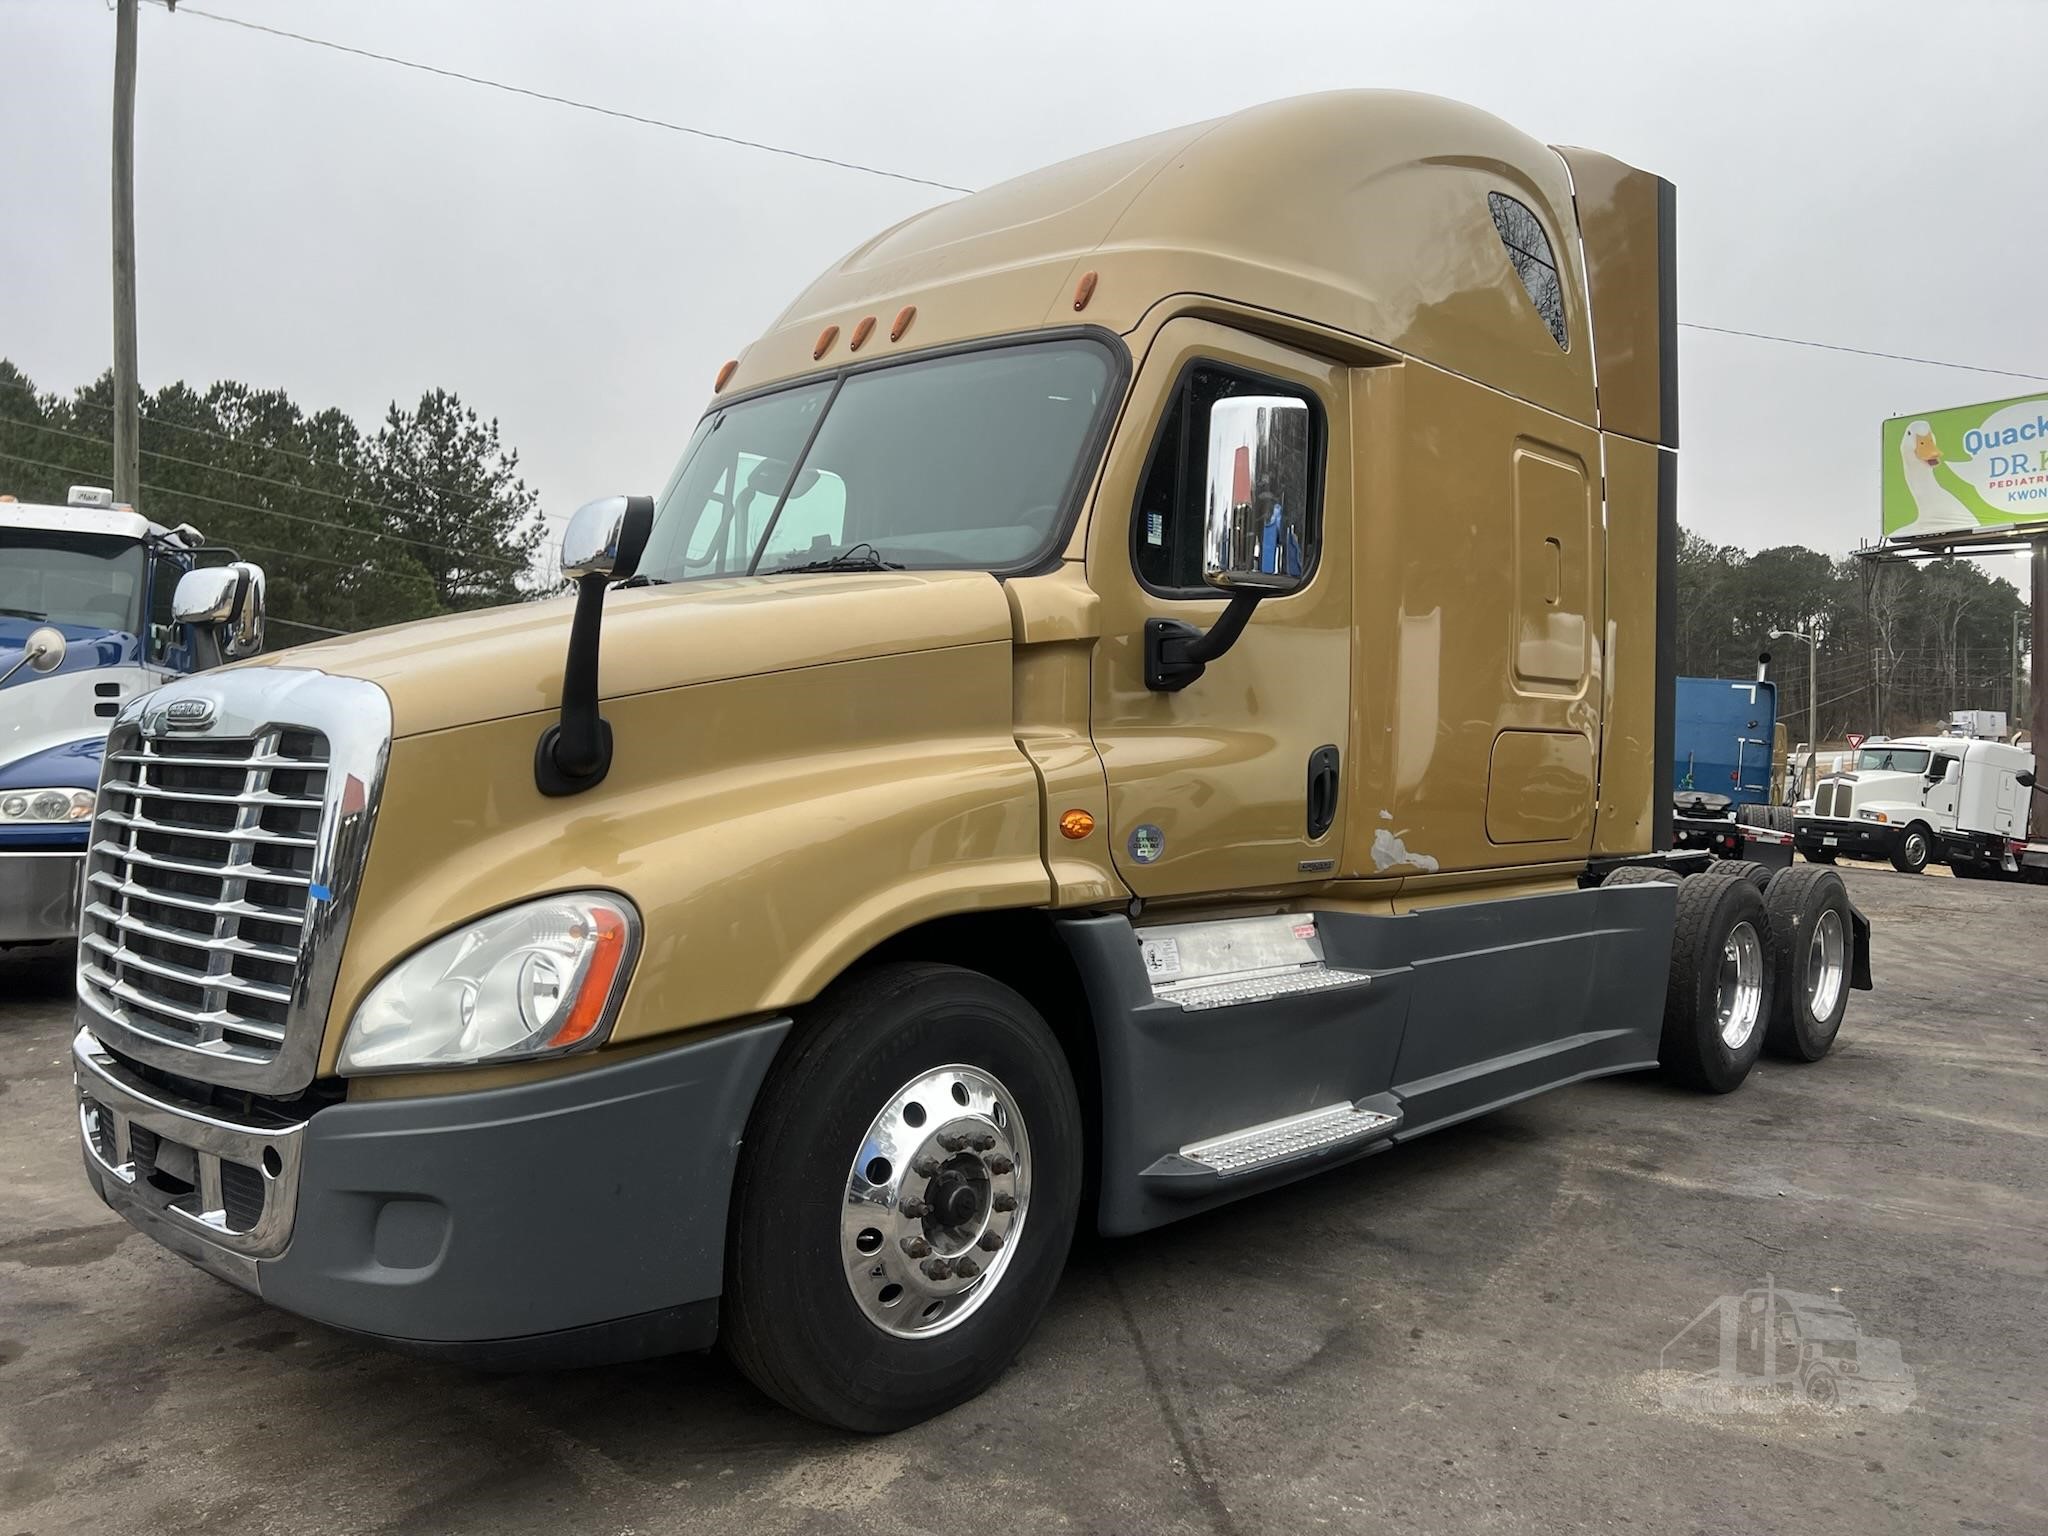 Freightliner Cascadia 125 Conventional Trucks W Sleeper For Sale 1730 Listings Truckpaper Com Page 1 Of 70